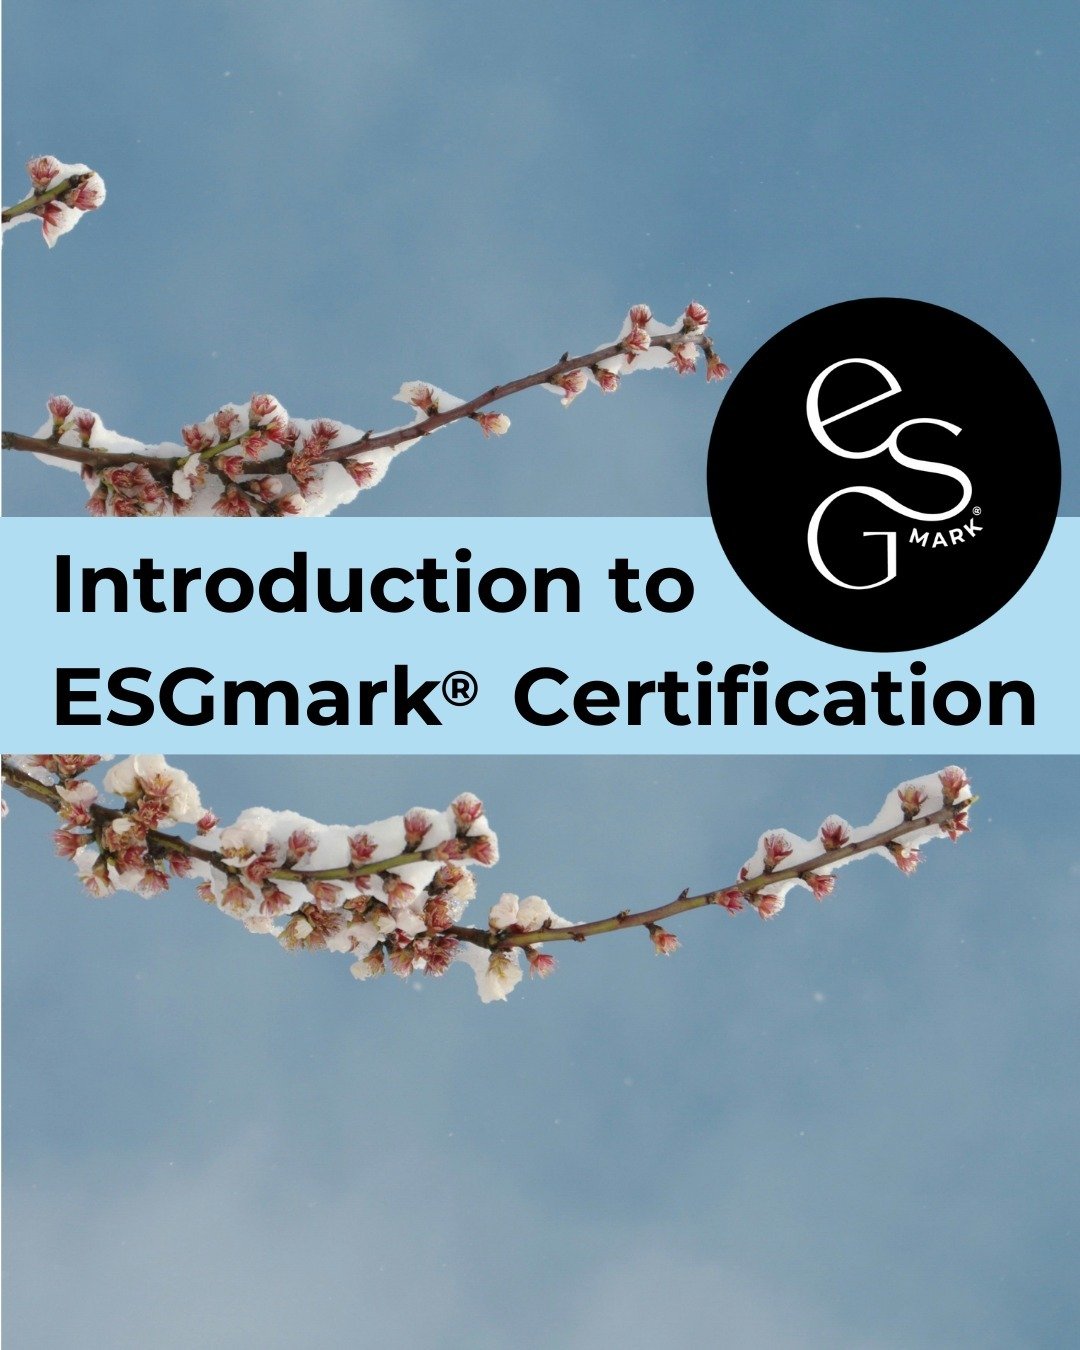 ESGmark&reg; is the community for people and organisations who care about the planet and society 🌍️⁠
⁠
Consumers are demanding change, and embedding responsible business practices is a competitive advantage. ⁠
⁠
ESGmark&reg; certification allows org